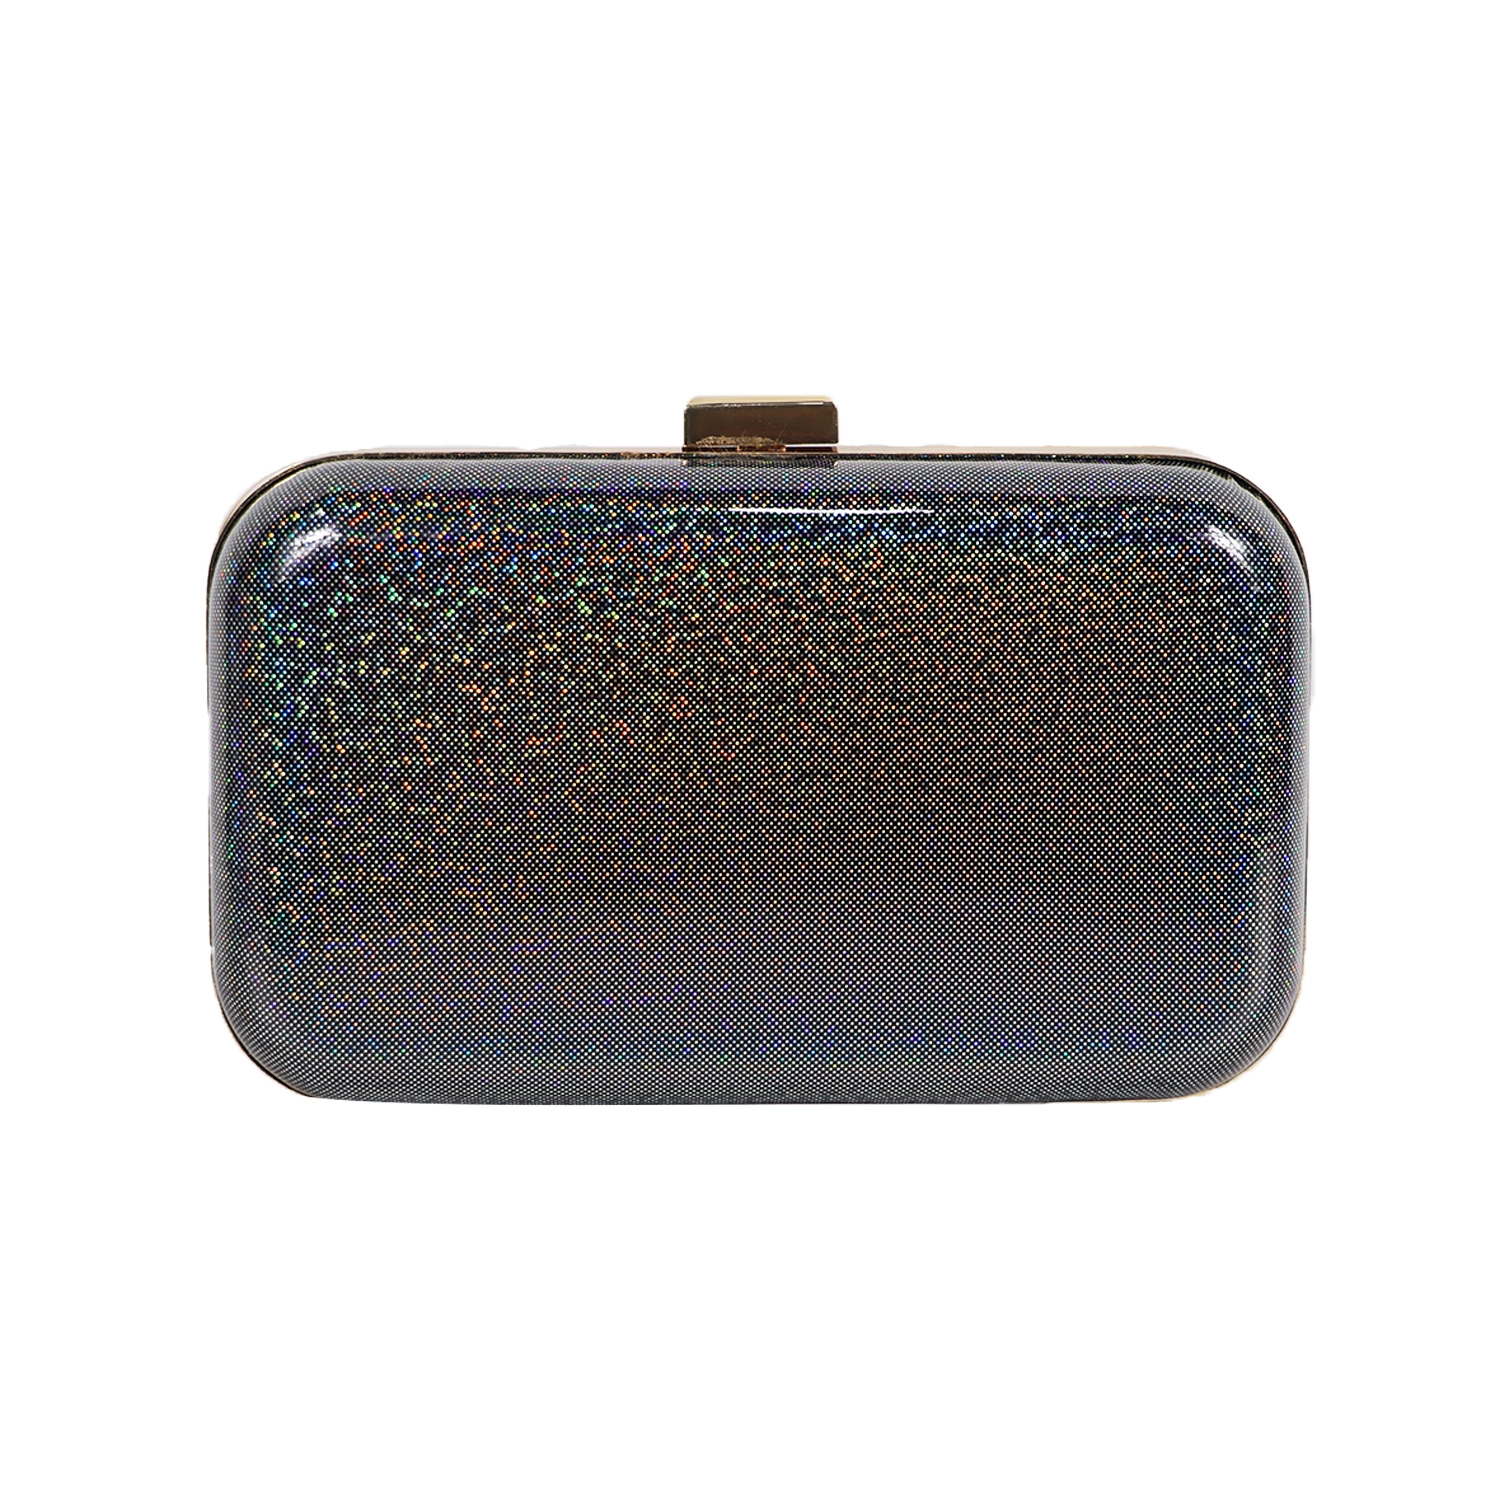 EMM | Black Shimmer Box Clutch with Chain Strap 1